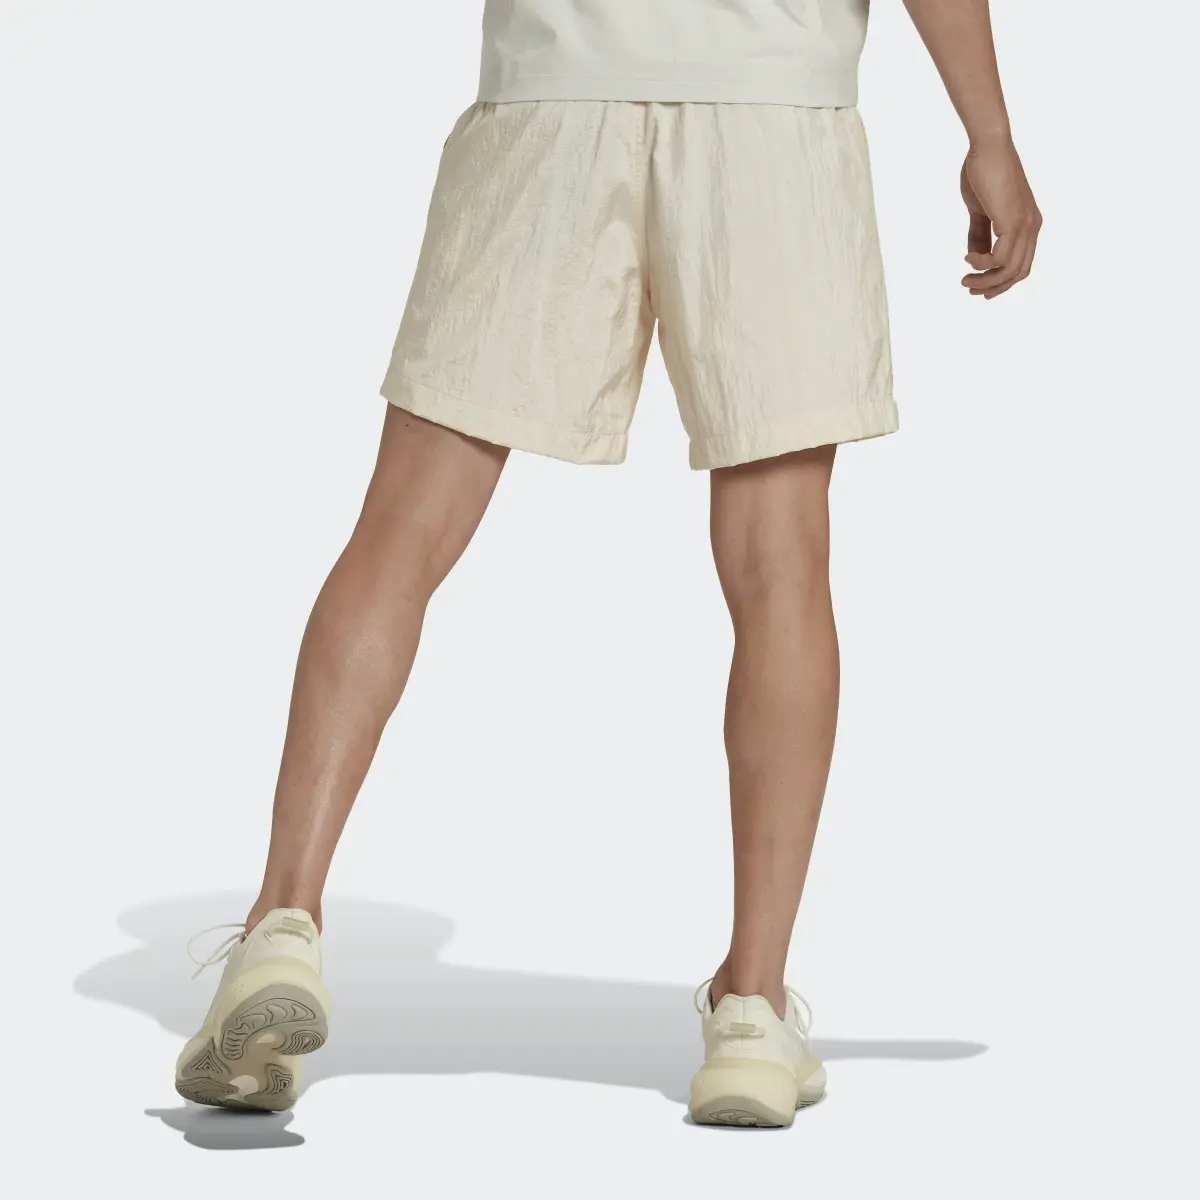 Adidas Reveal Material Mix Shorts. 3